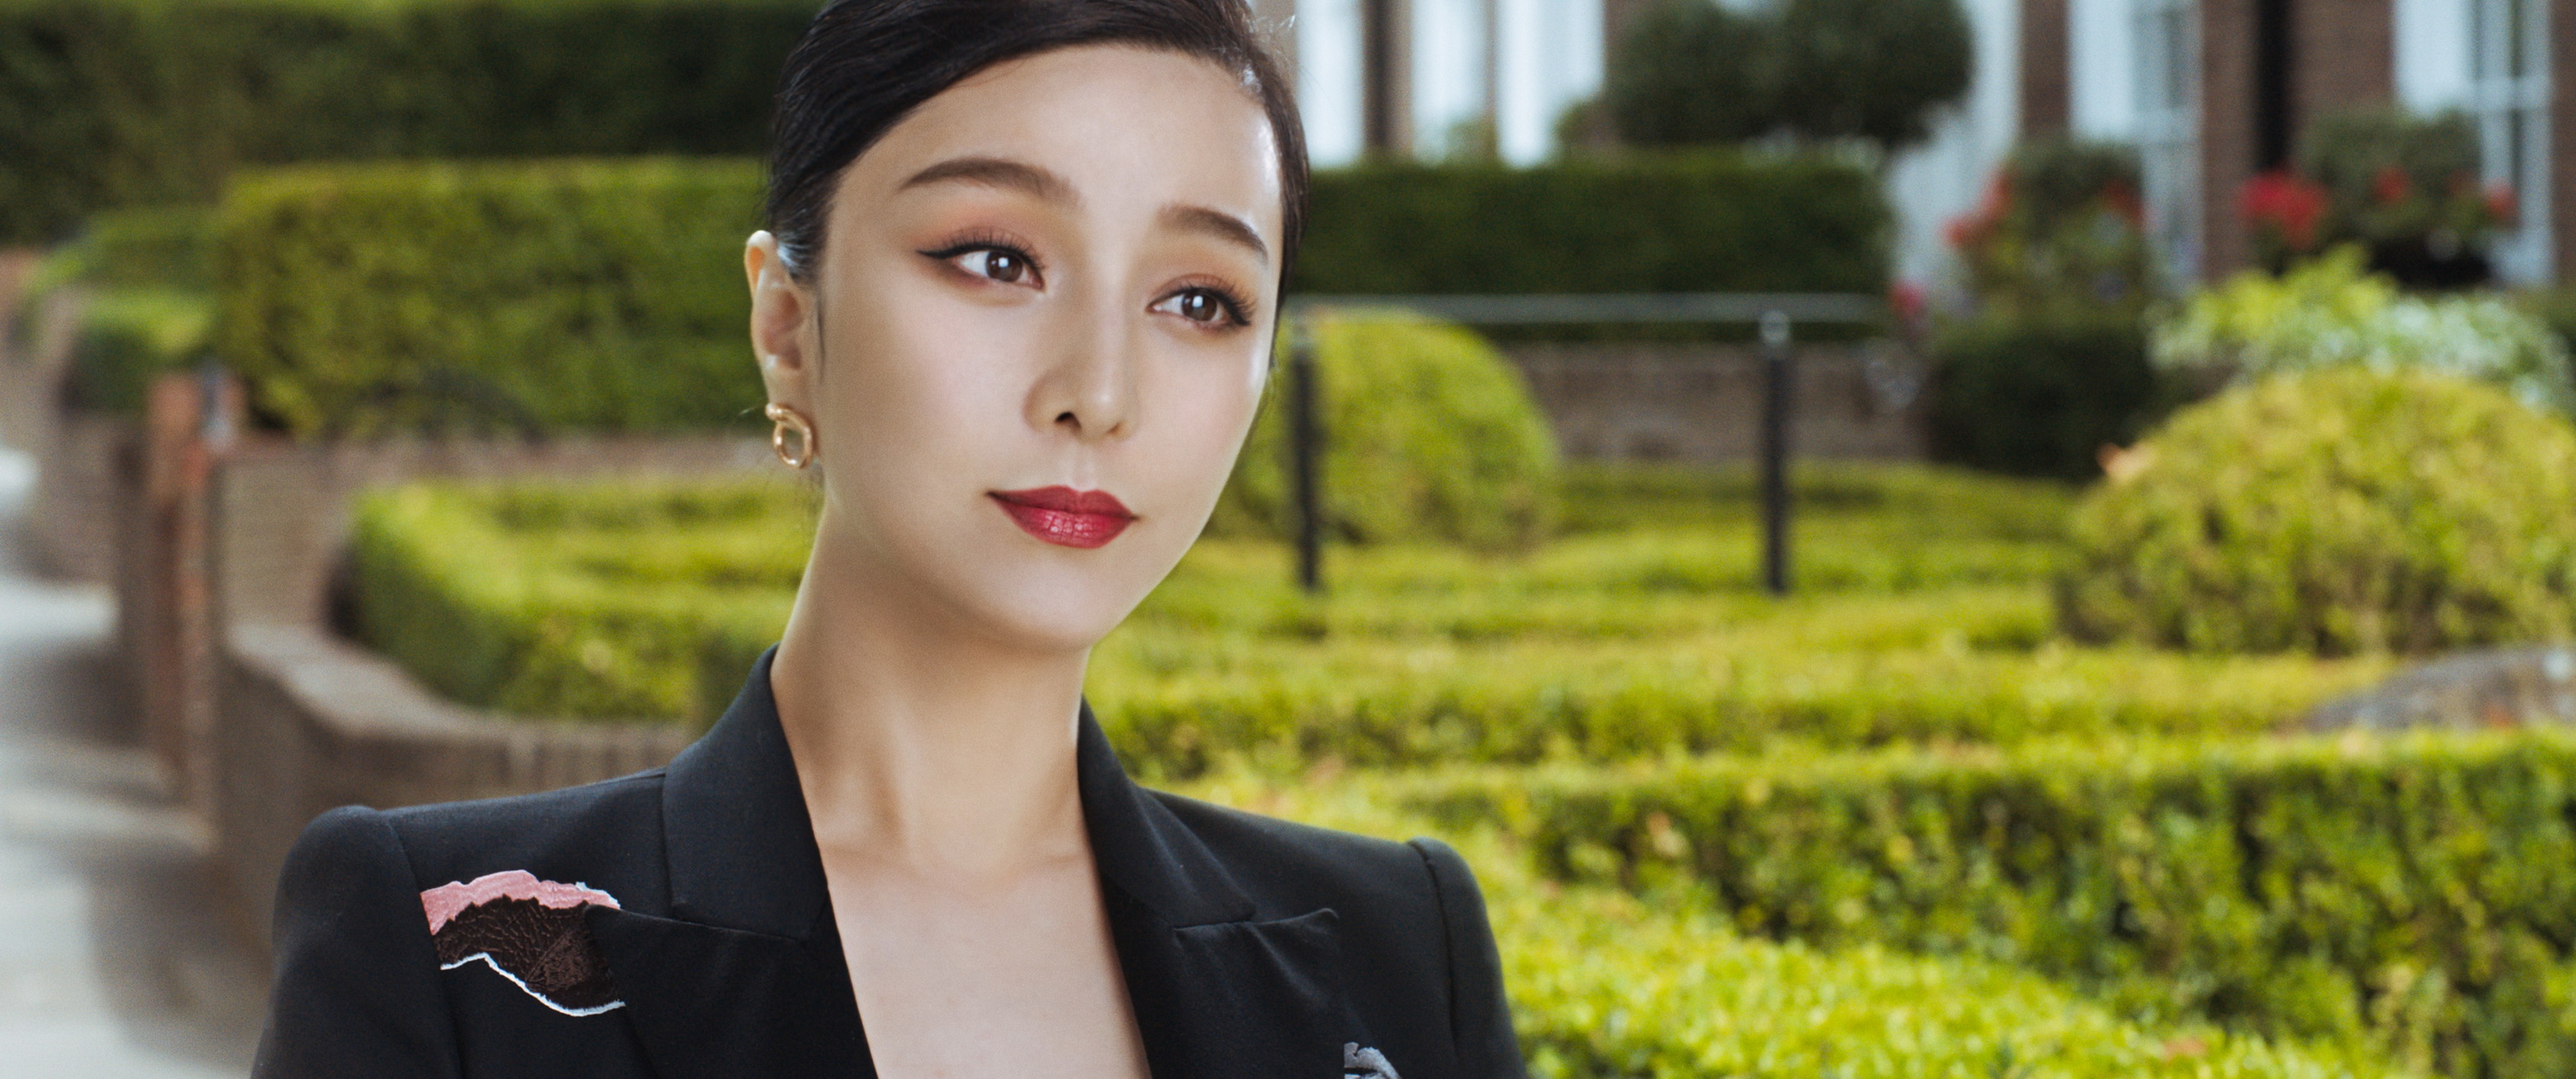 Piaget THE 355 Fan Bingbing as Lin Mi Sheng Possession earrings Courtesy of Universal Pictures